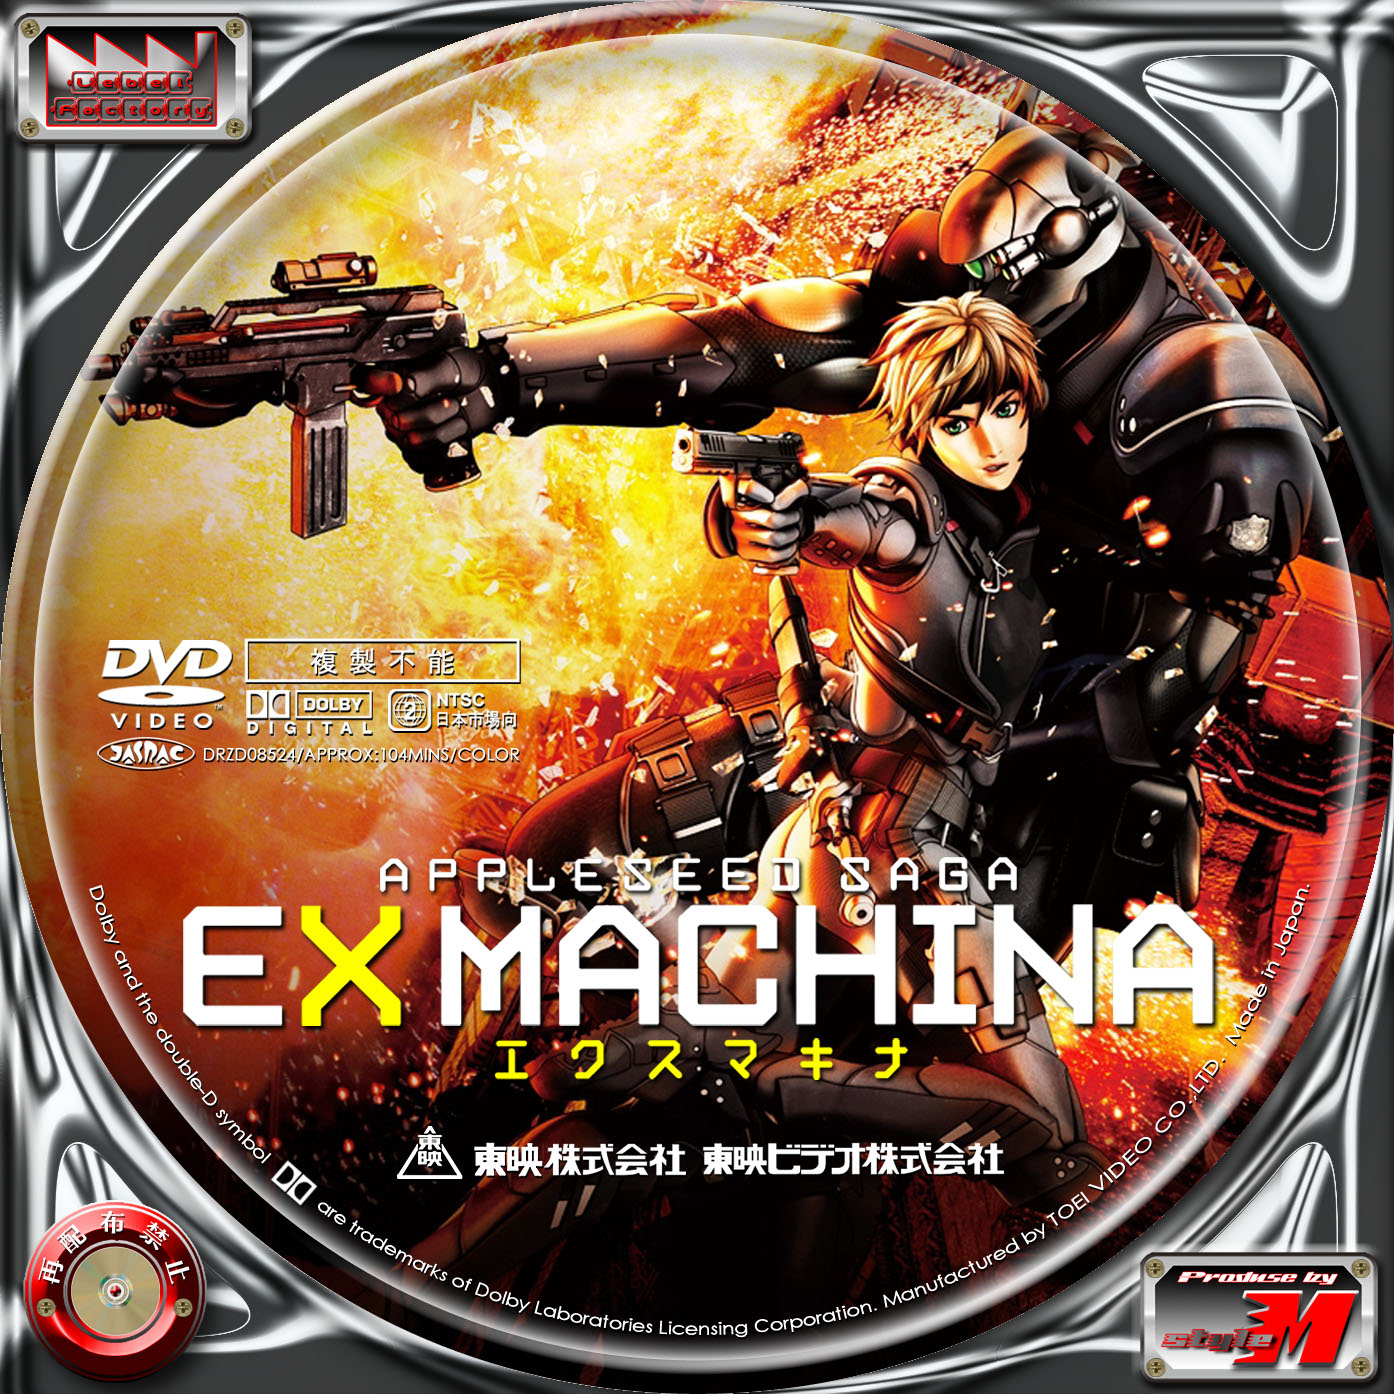 APPLESEED EX MACHINA エクスマキナ | Label Factory - M style